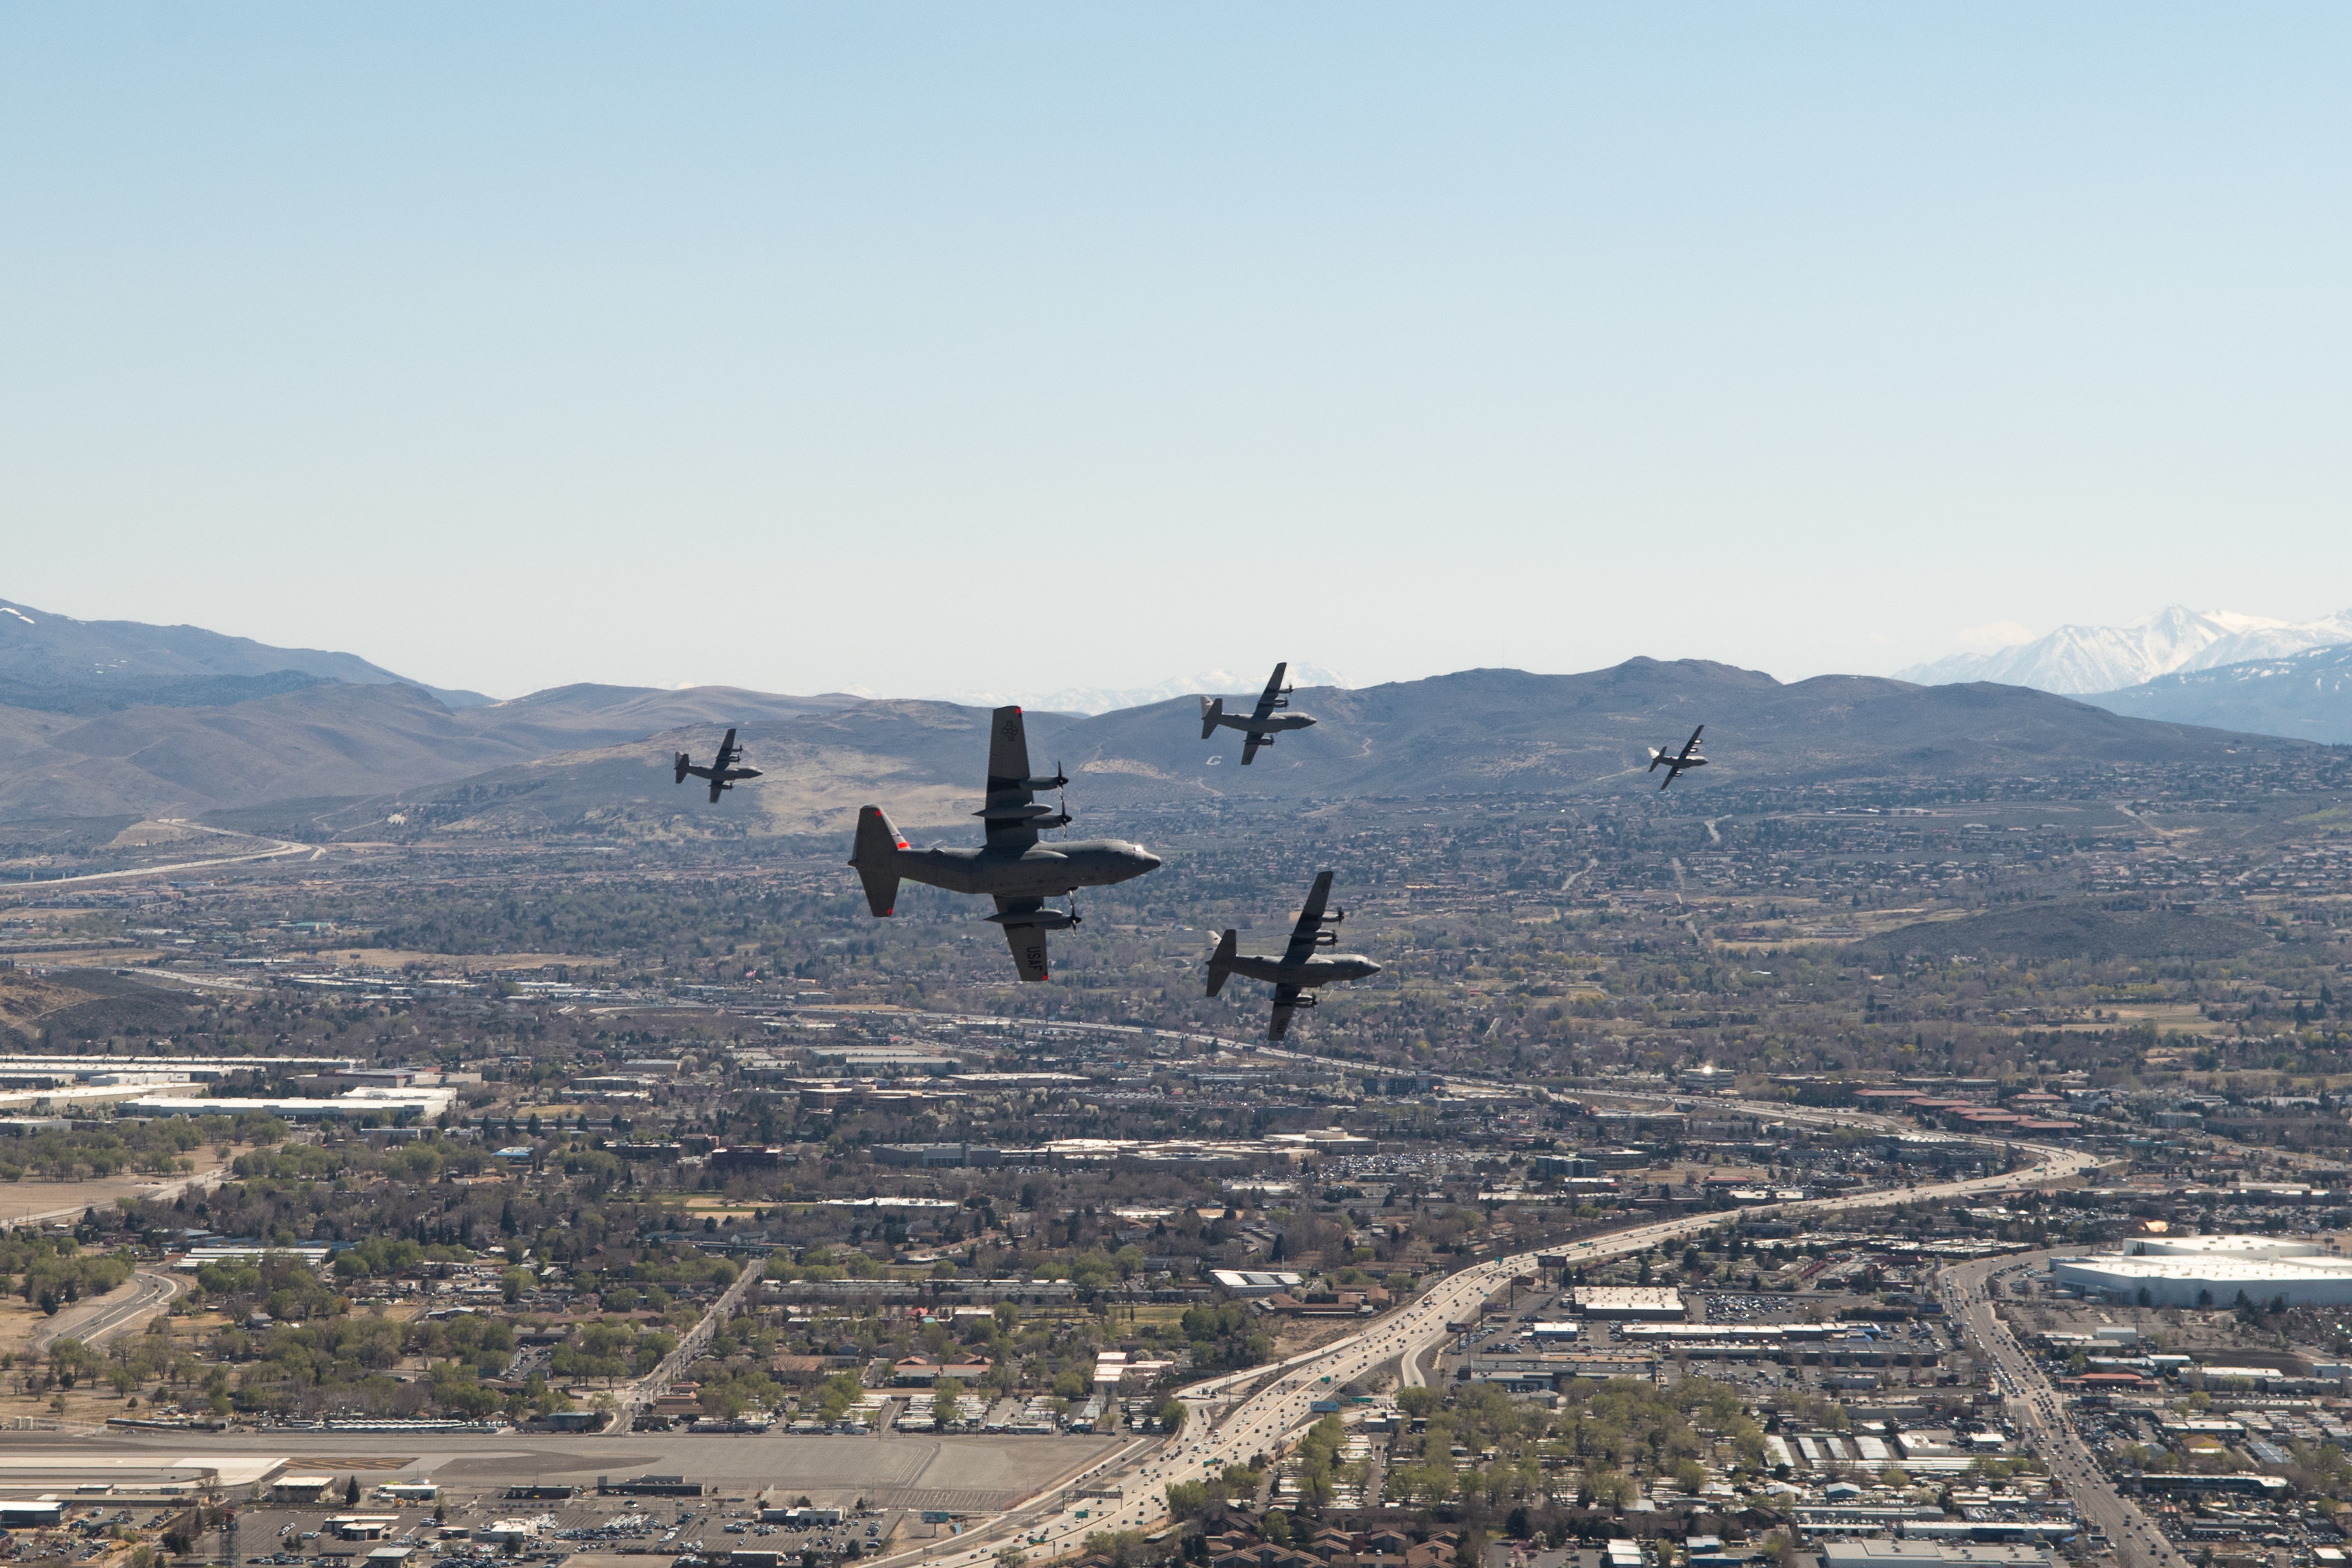 6-ship C-130 formation over Reno, Nev.